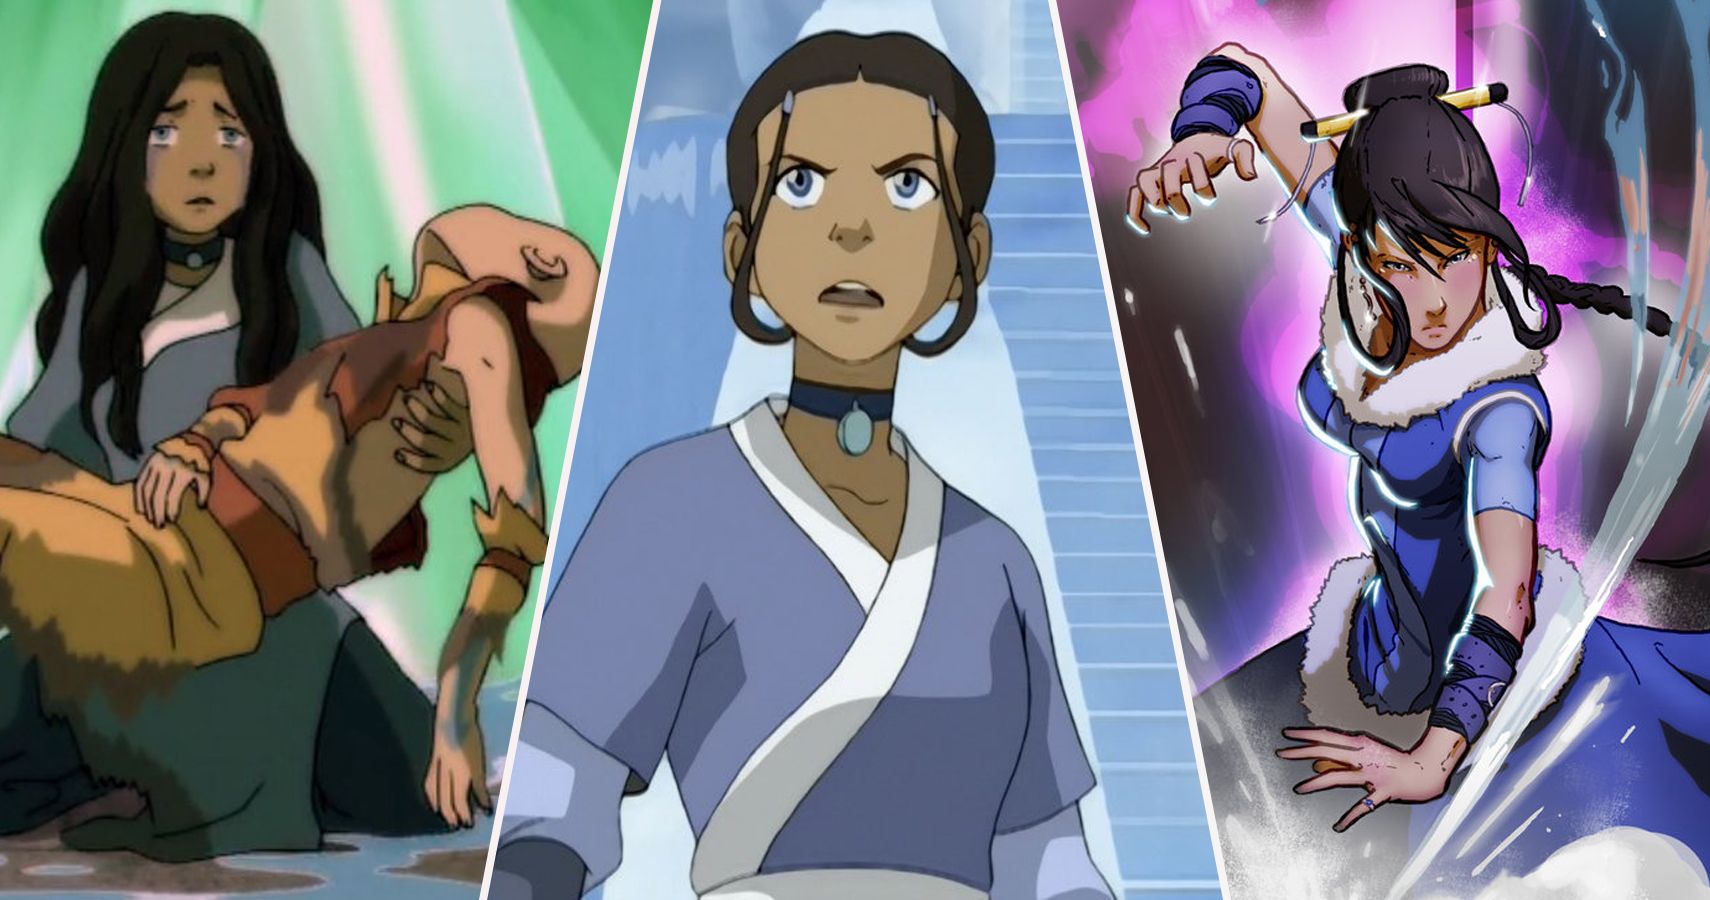 terminology - Is Avatar: the Last Airbender an anime? - Anime & Manga Stack  Exchange